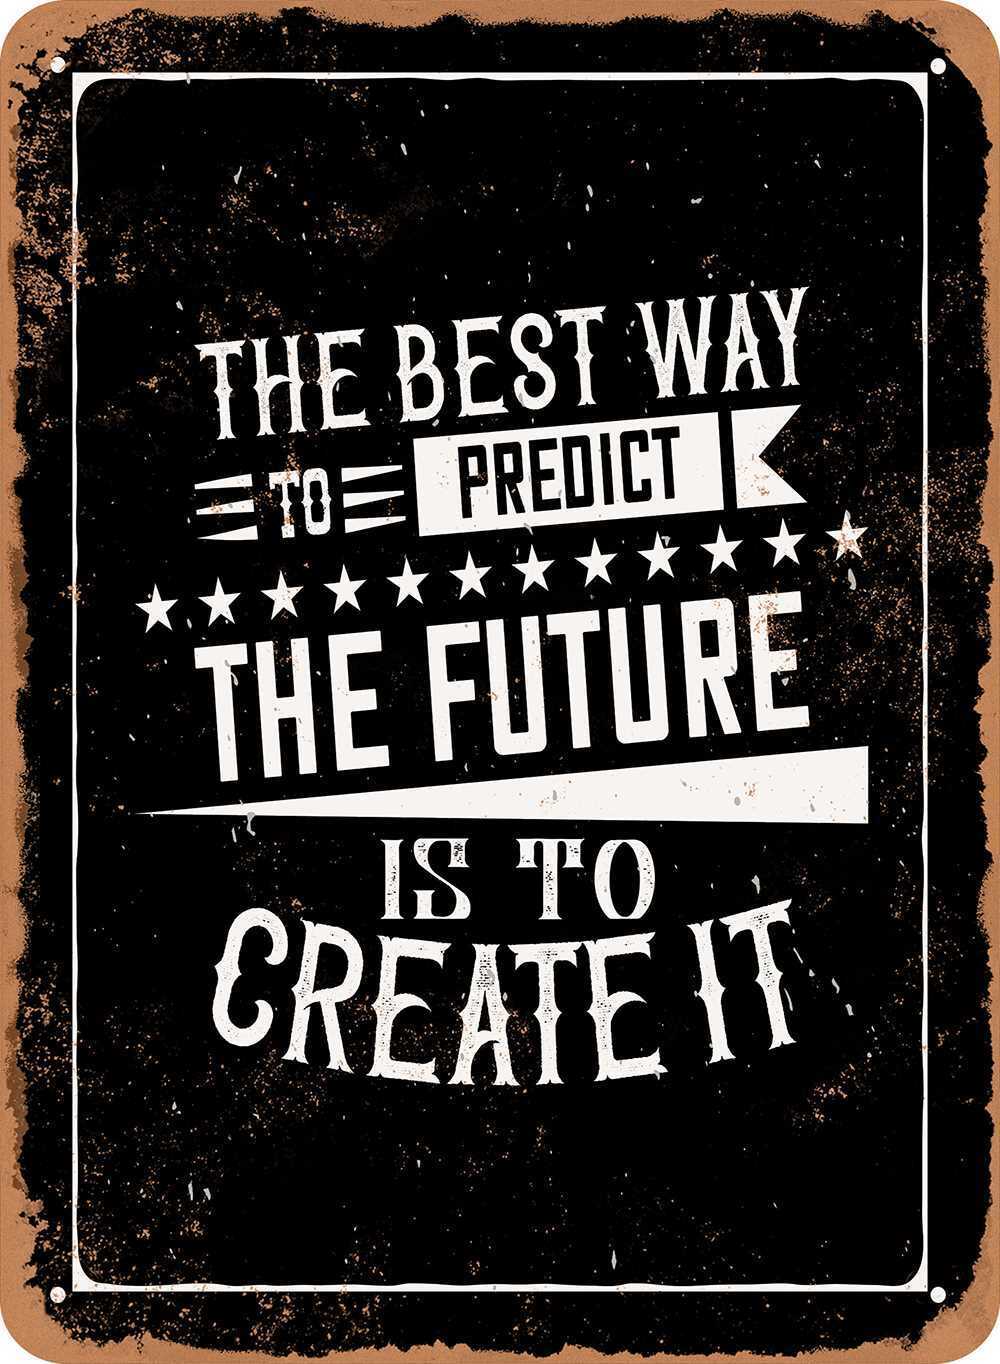 Metal Sign - The Best Way To Predict the Future is Create It - (Fitness) Vintage